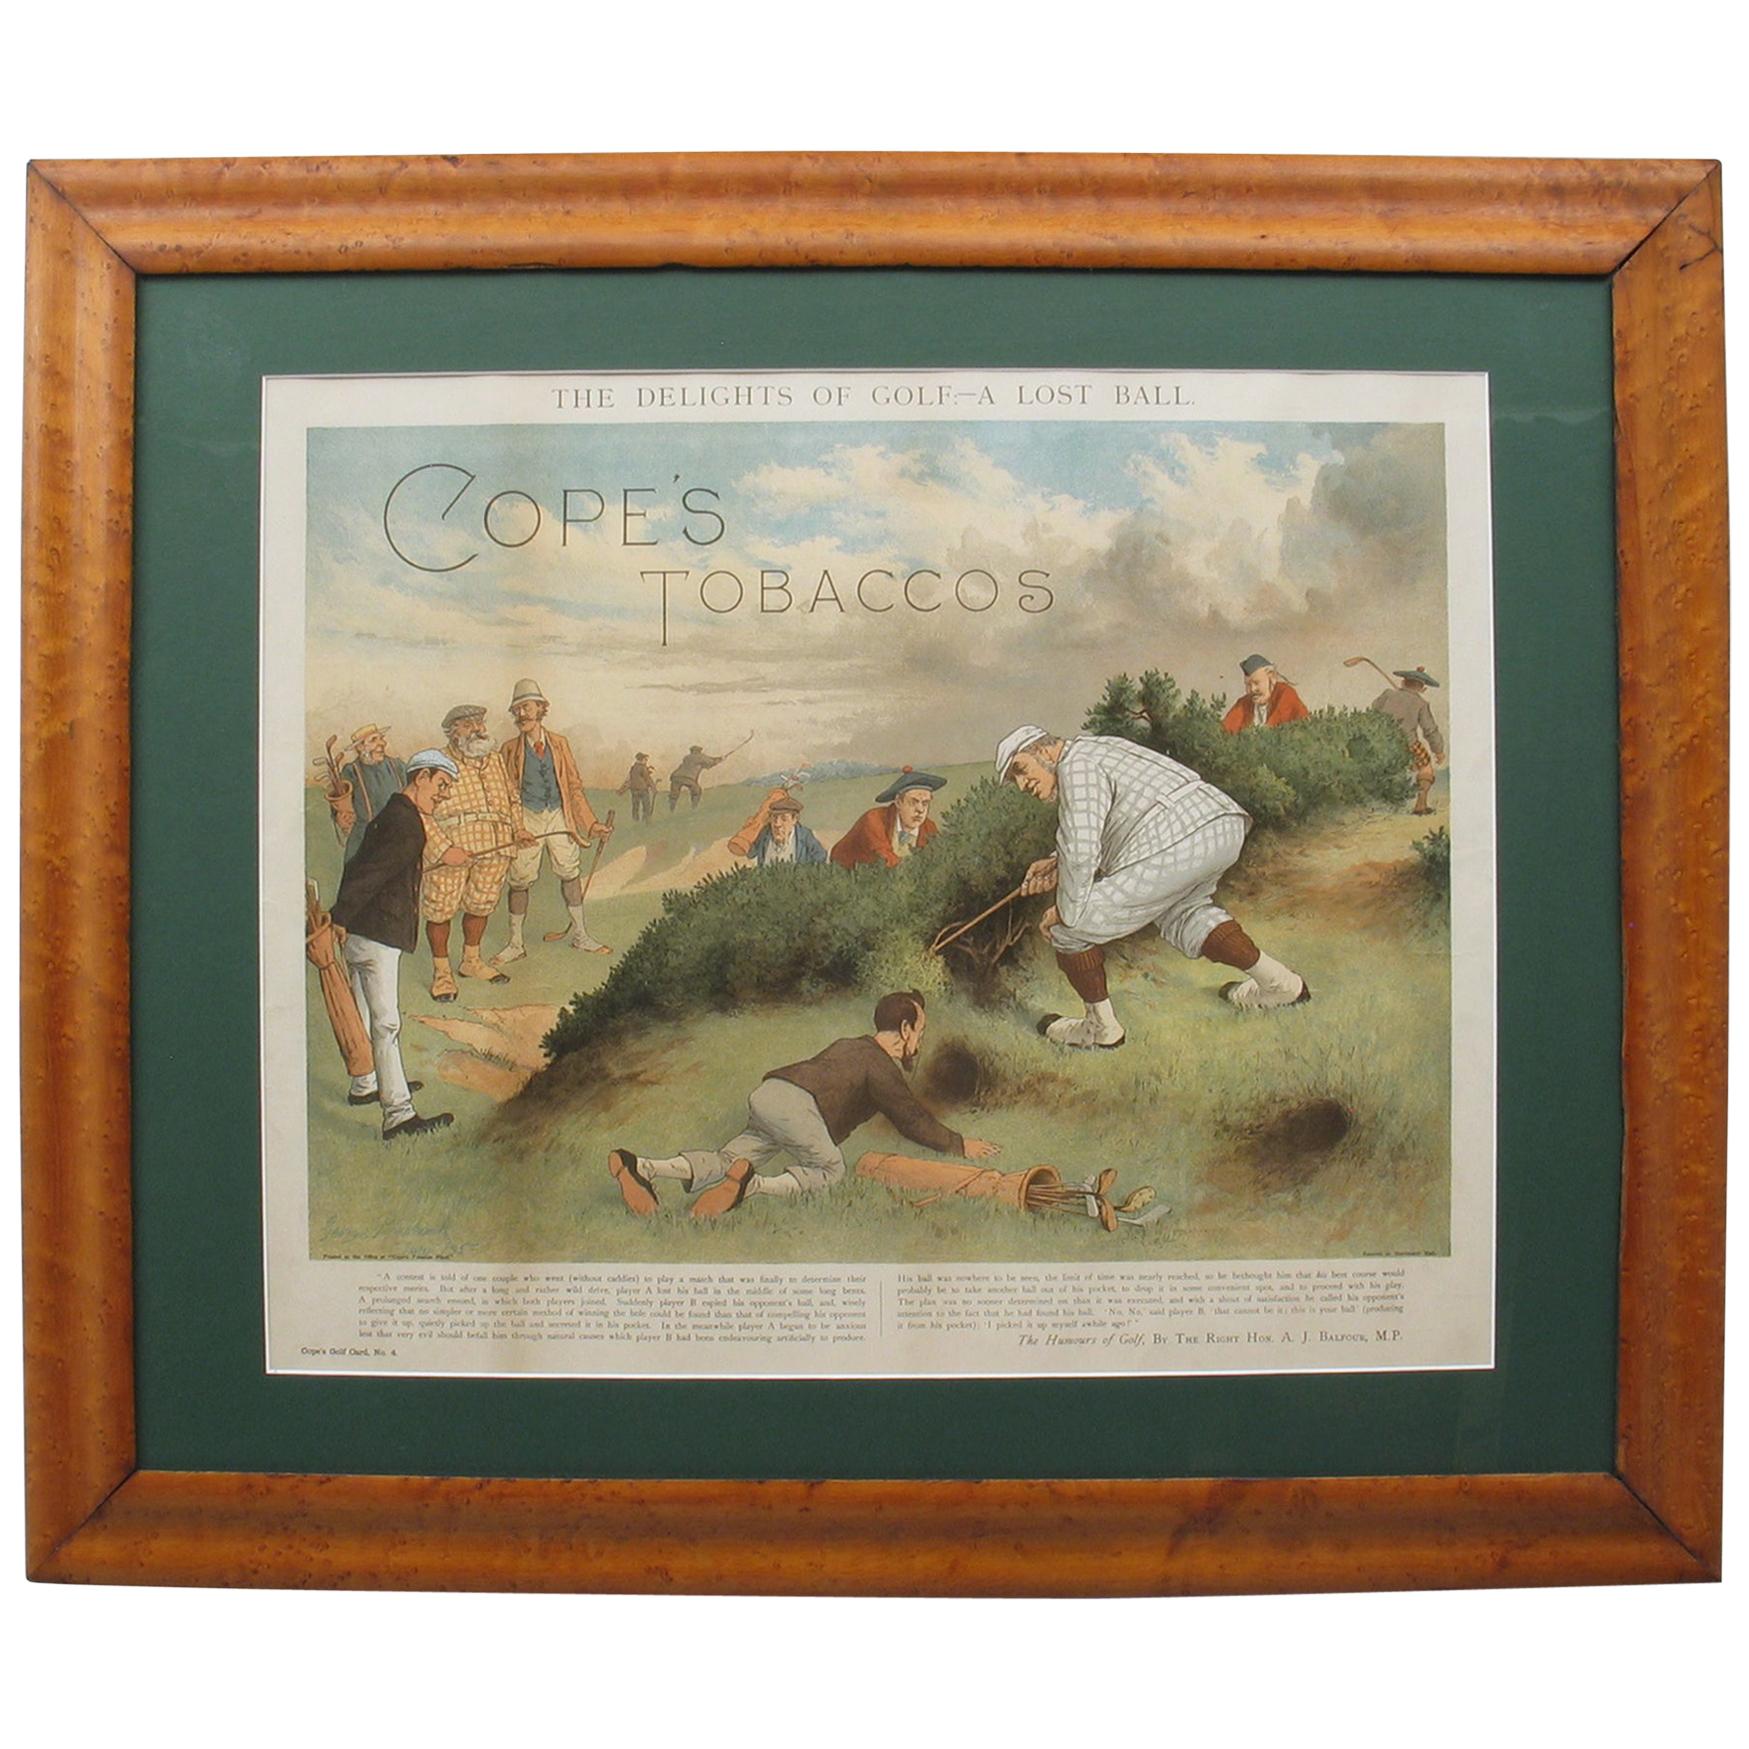 Antique Copes Tobacco Golf Print, A Lost Ball by George Pipeshank